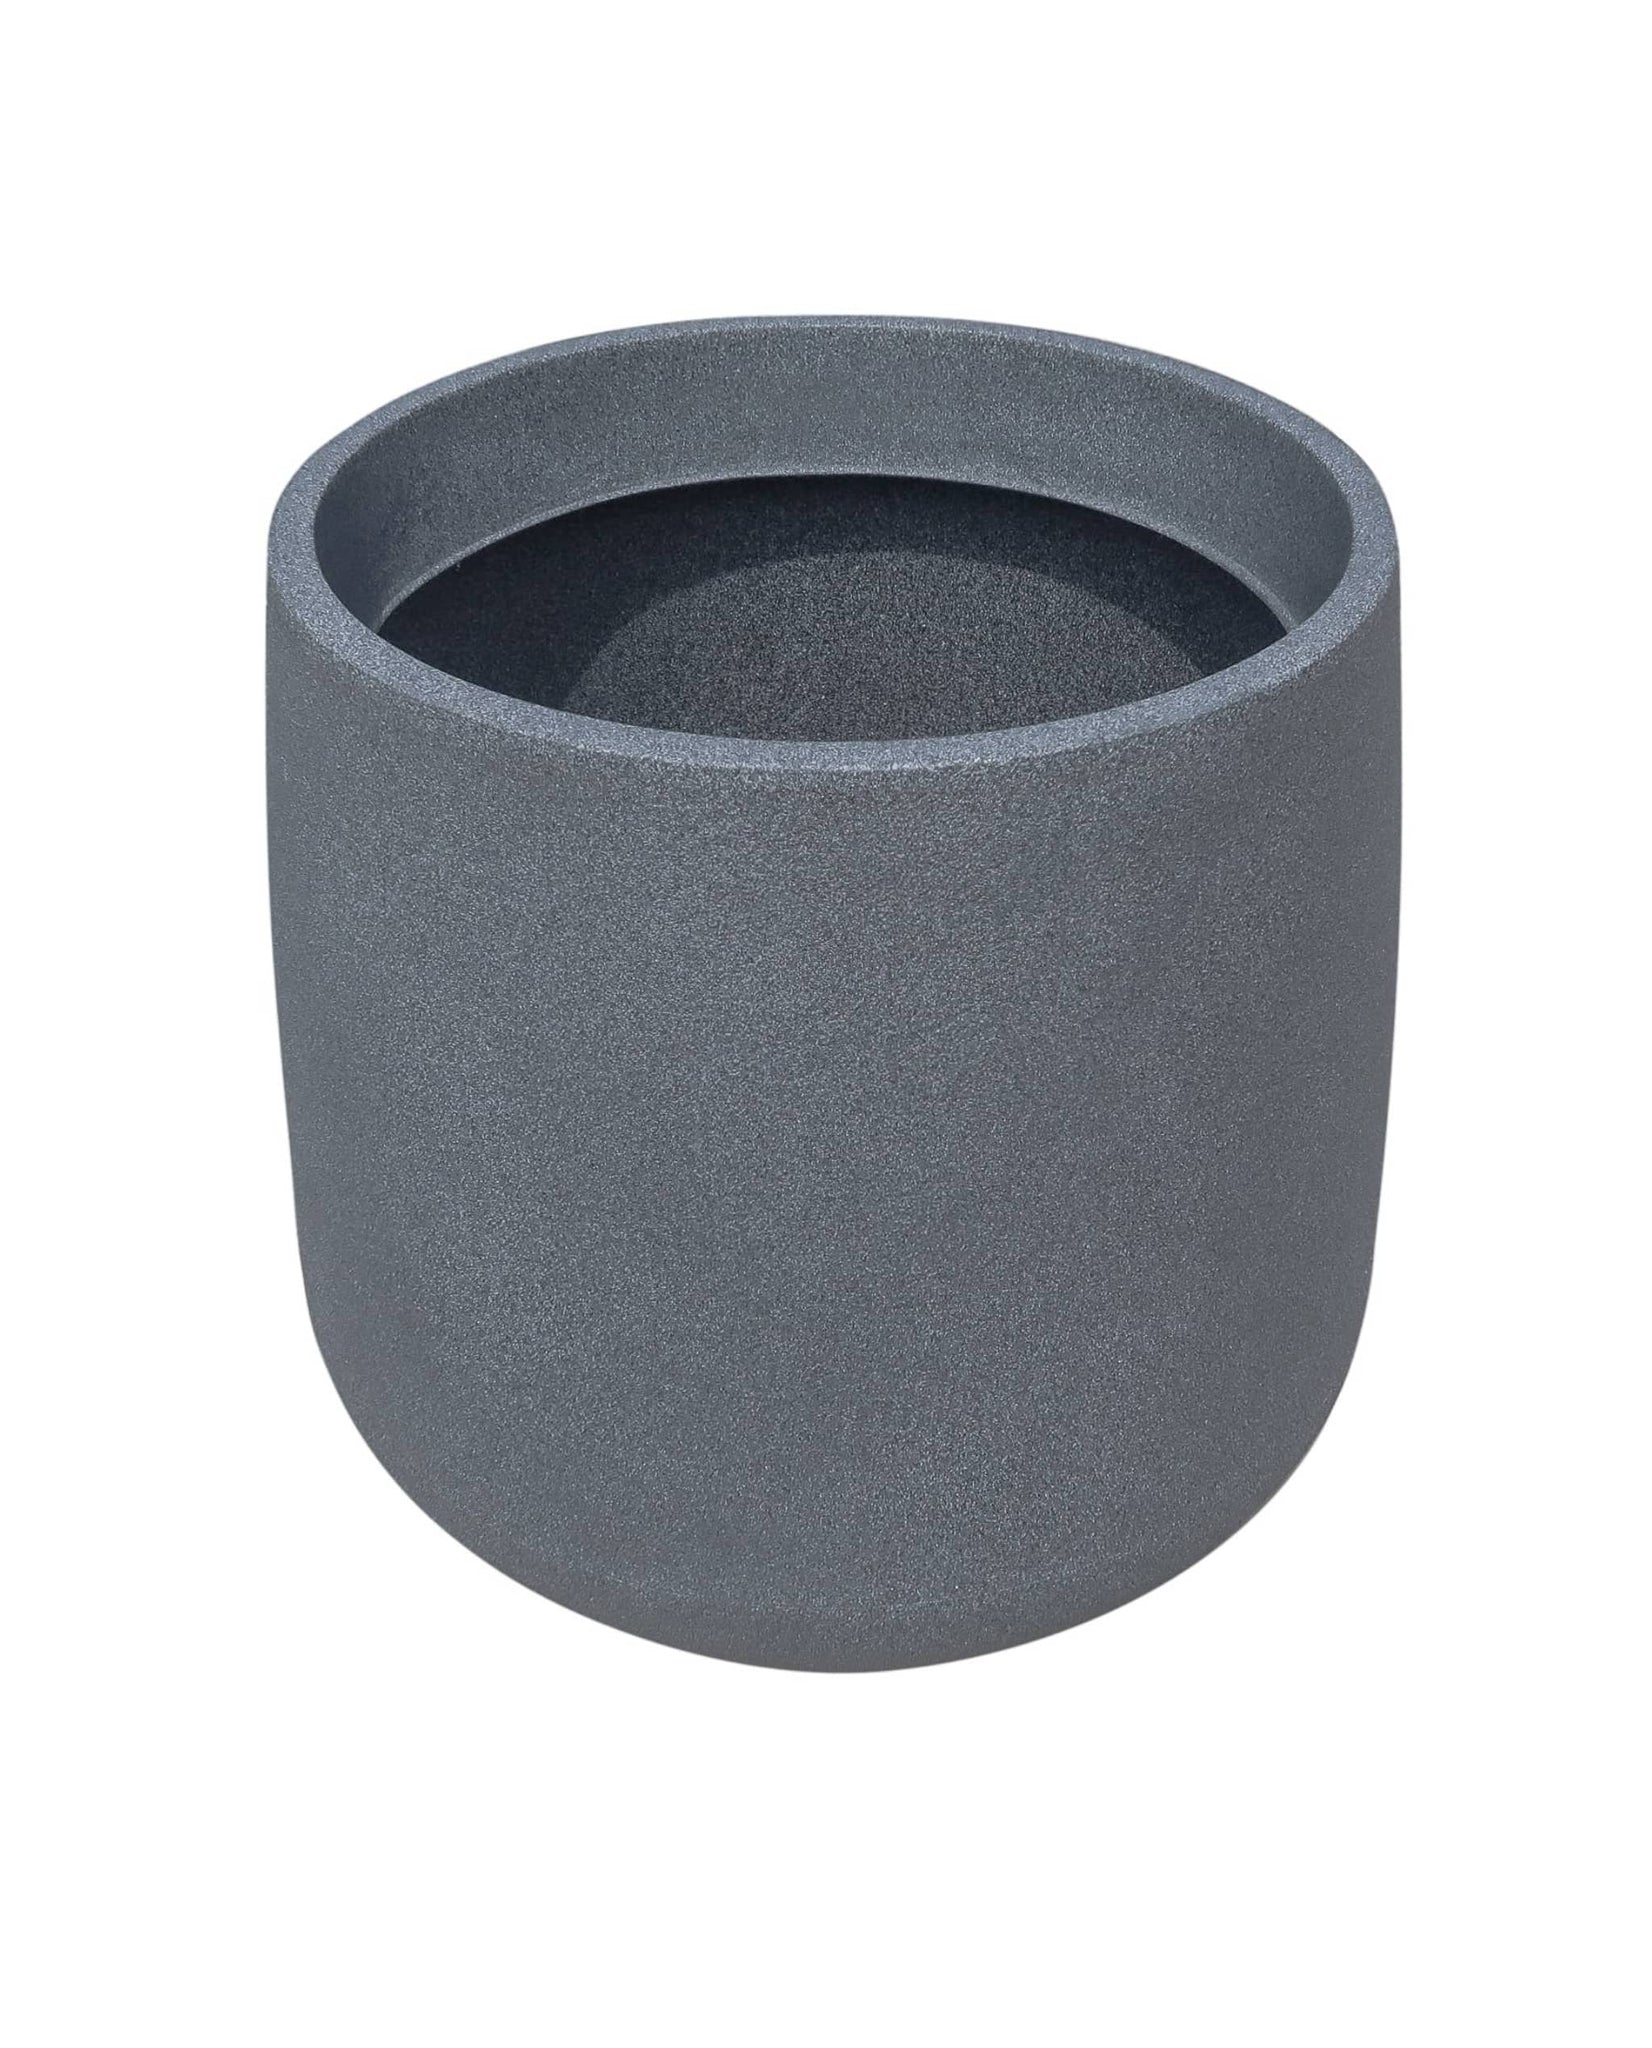 Slight angled view of the medium bios planter, showing the inside rim of the planter and the beautiful slightly textured finish. Colour Charcoal